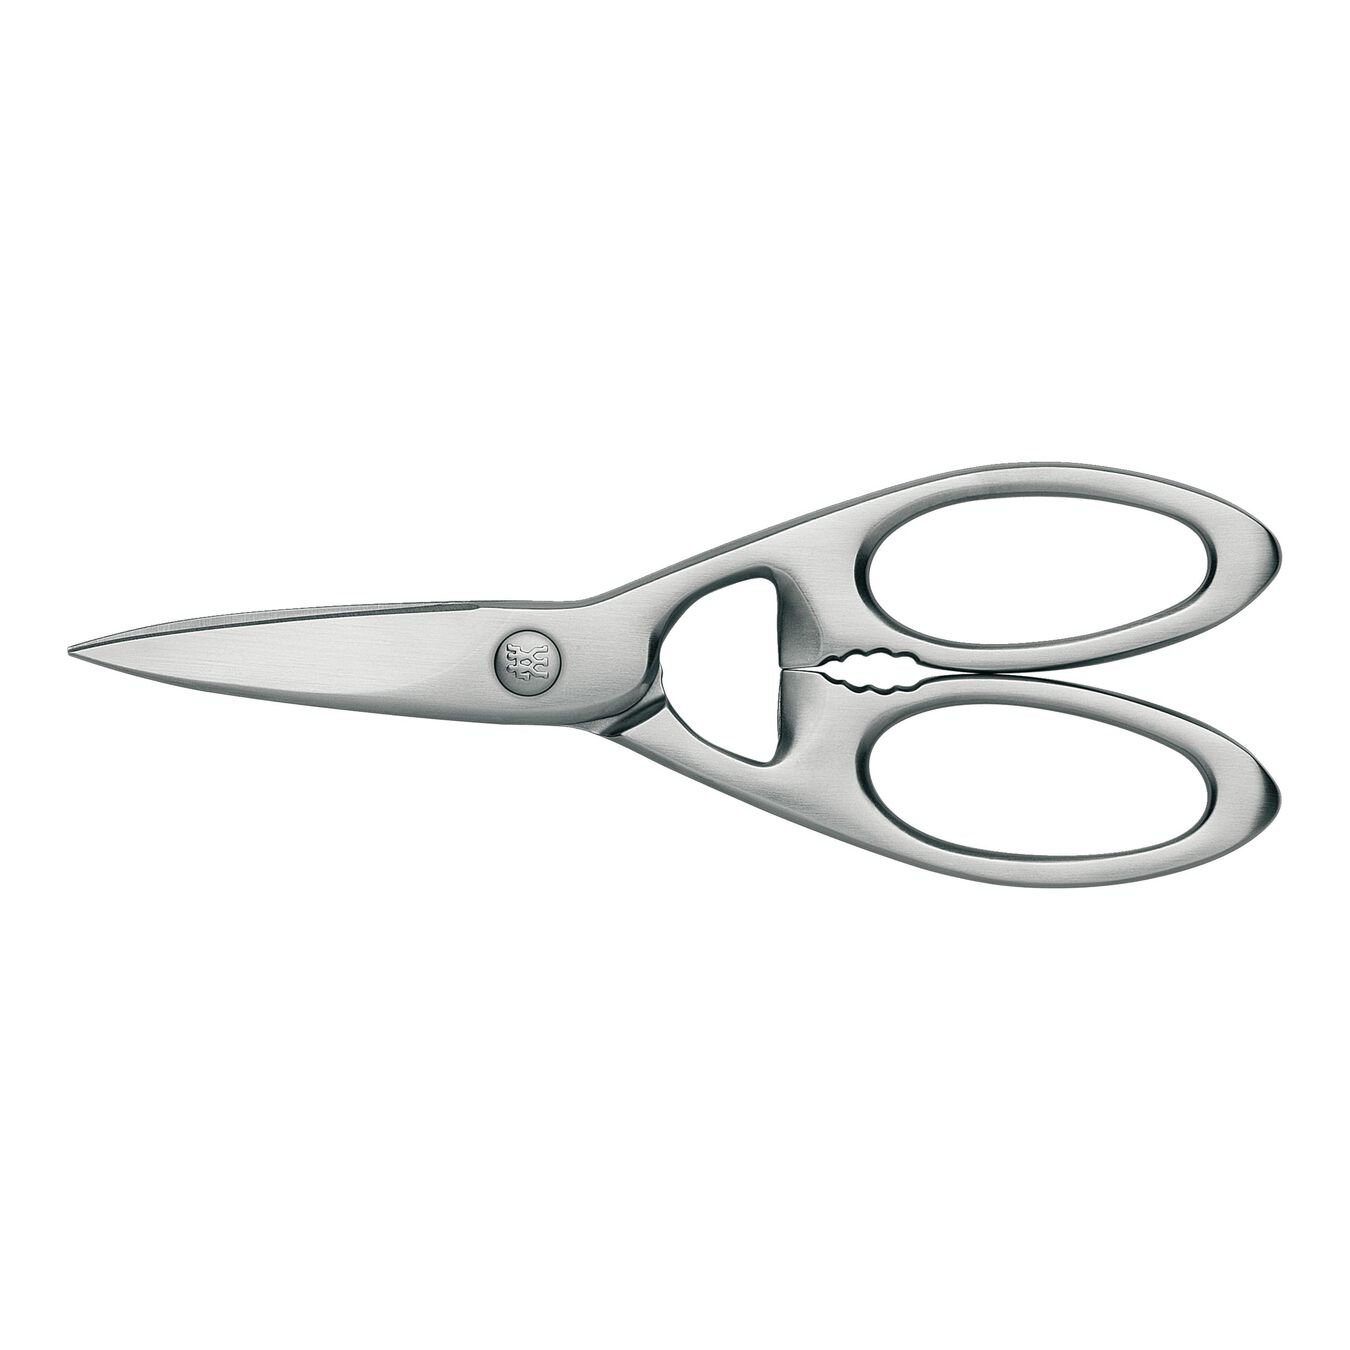 Stainless steel Multi-purpose shears silver,,large 1